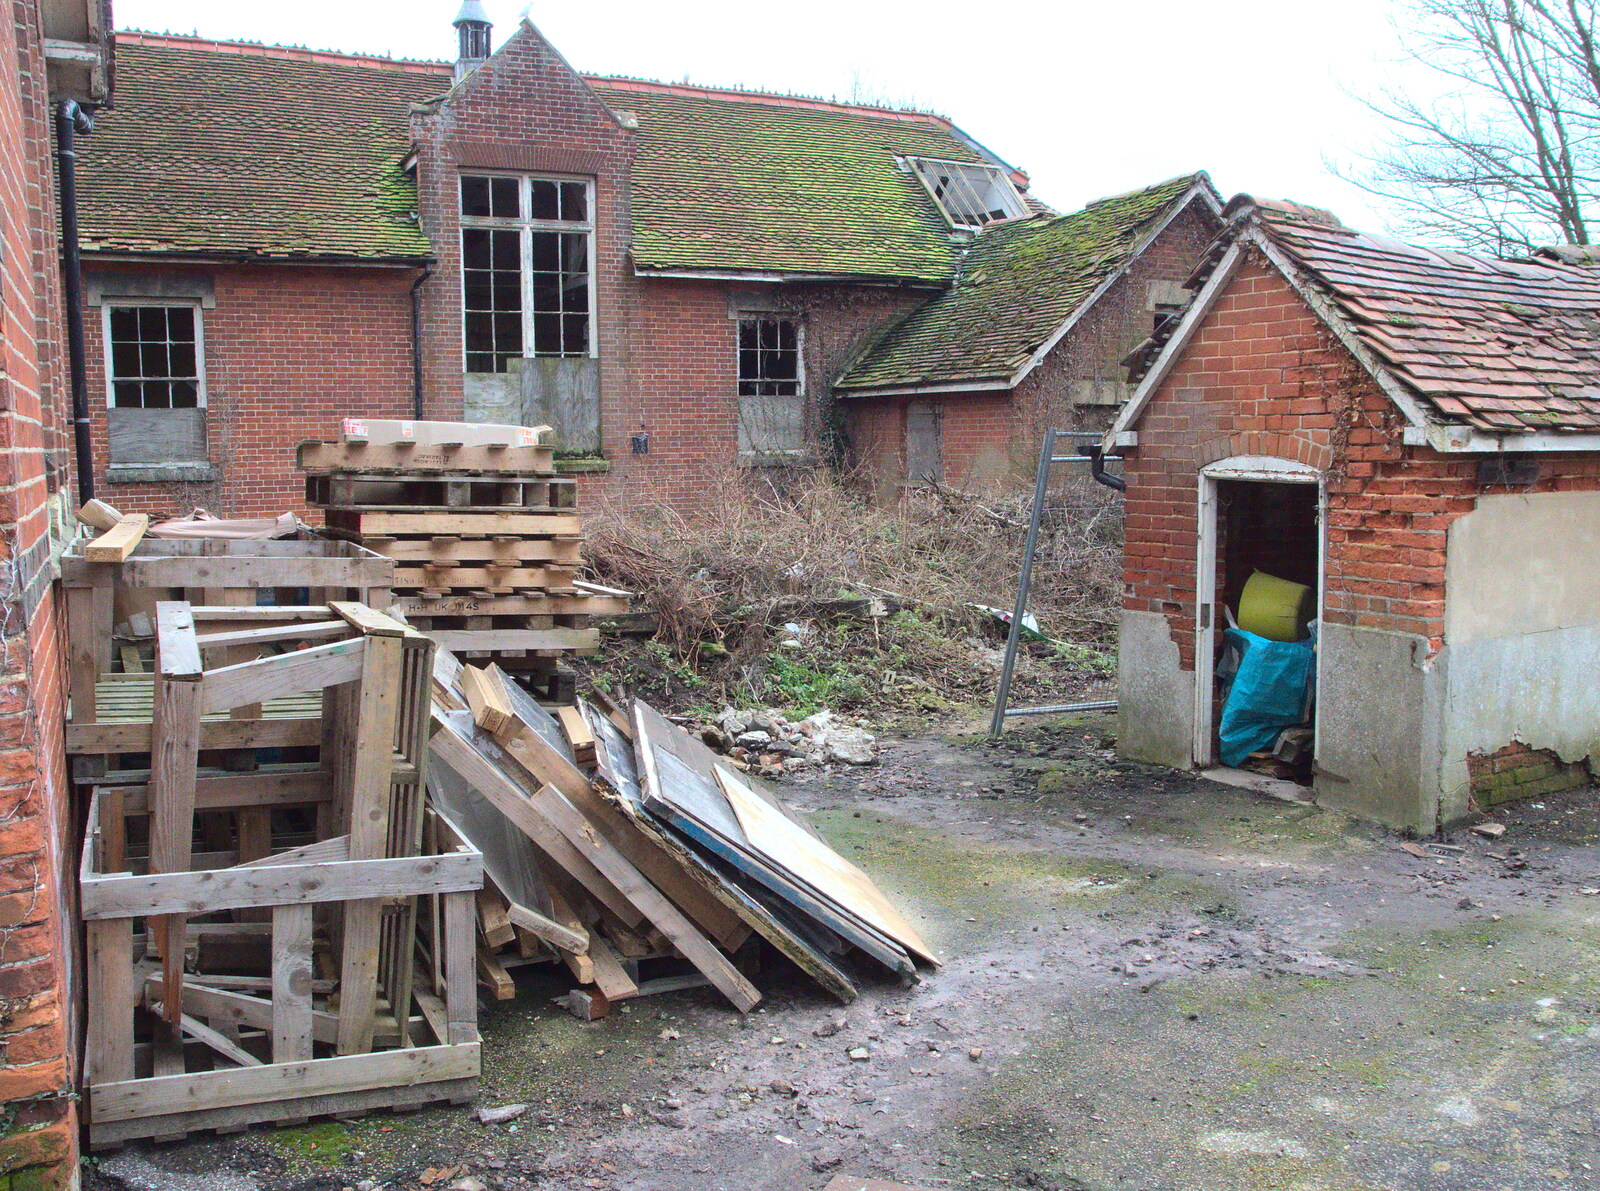 The derelict infants school in Diss from Closing Down: A Late January Miscellany, Diss, Norfolk - 31st January 2015